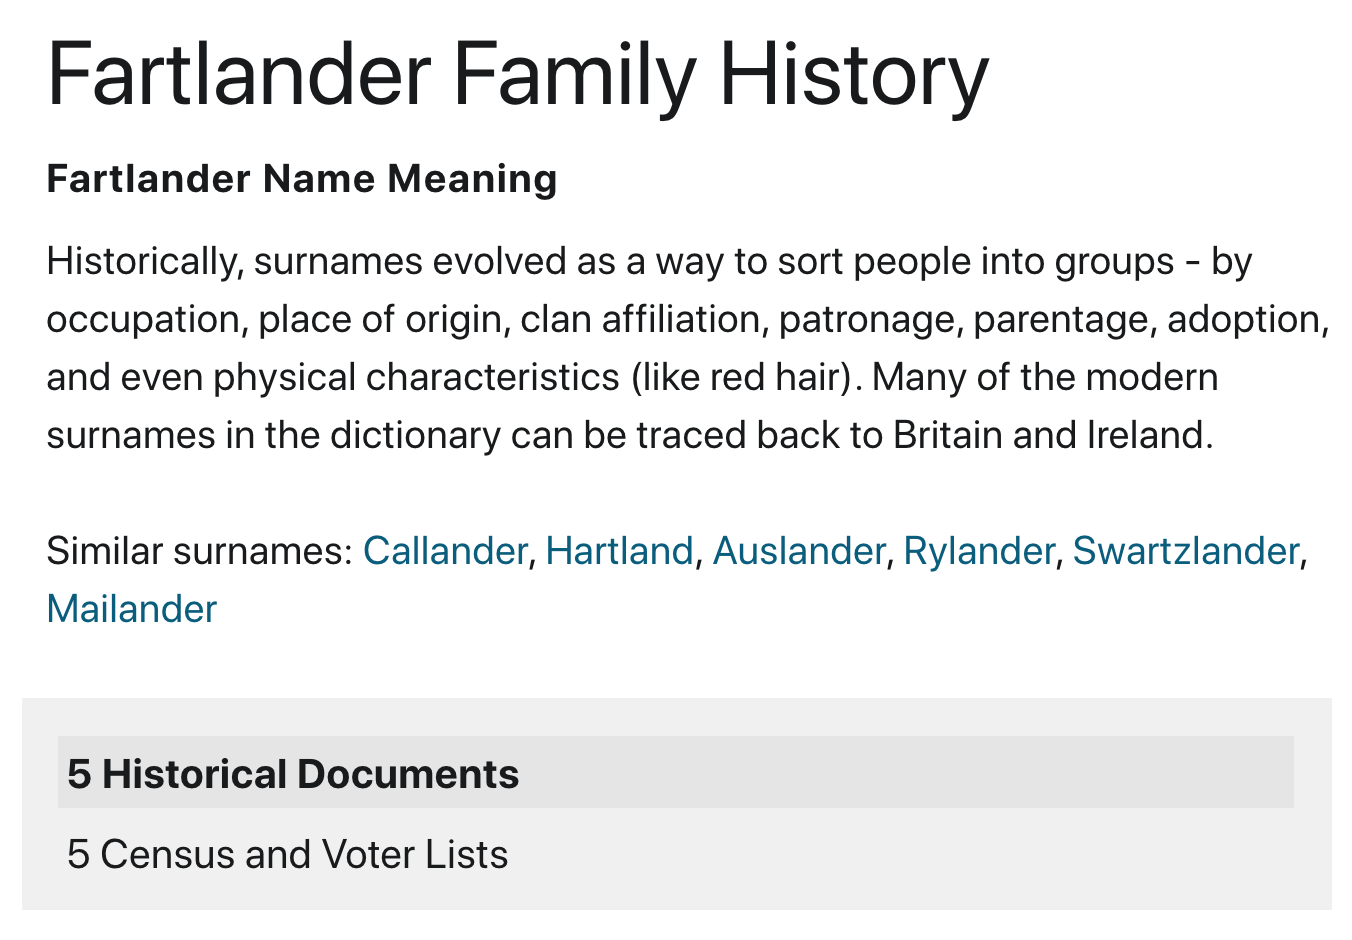 angle - Fartlander Family History Fartlander Name Meaning Historically, surnames evolved as a way to sort people into groups by occupation, place of origin, clan affiliation, patronage, parentage, adoption, and even physical characteristics red hair. Many